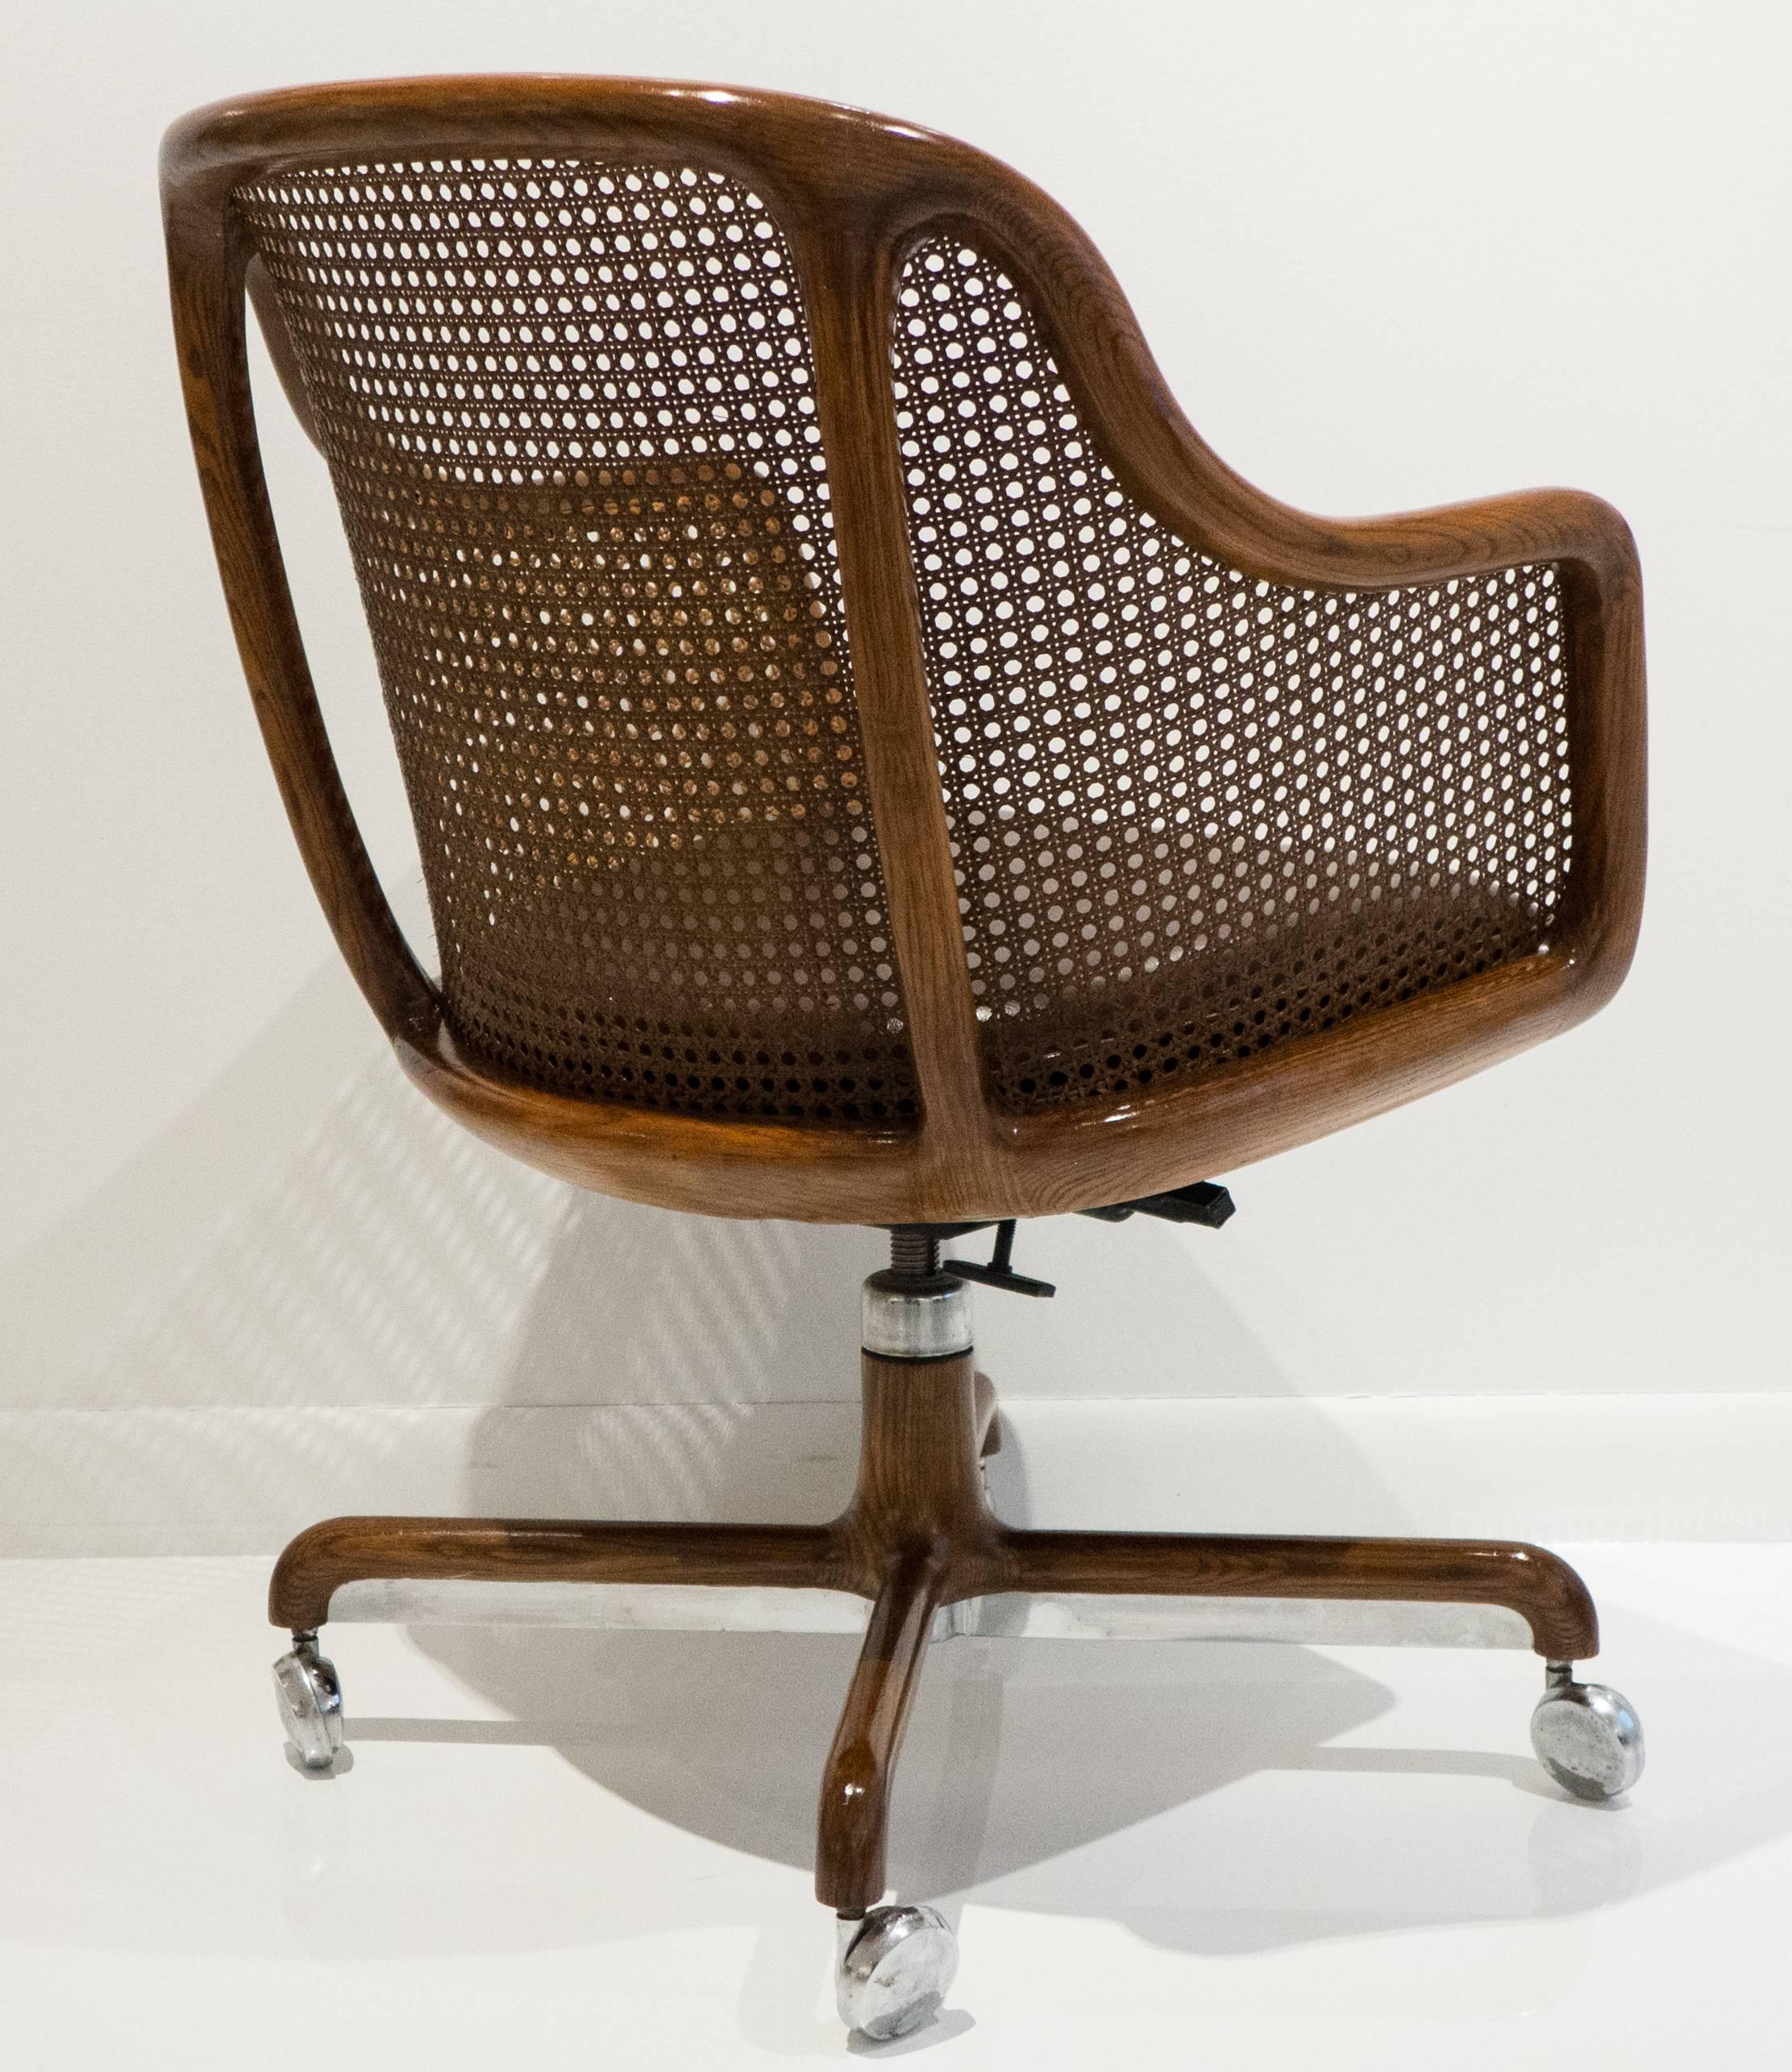 Adjustable tilt-back armchair with sinuous solid oak frame, caned back and leather seat. Designed by Ward Bennett and produced by Brickel Industries, circa 1975.